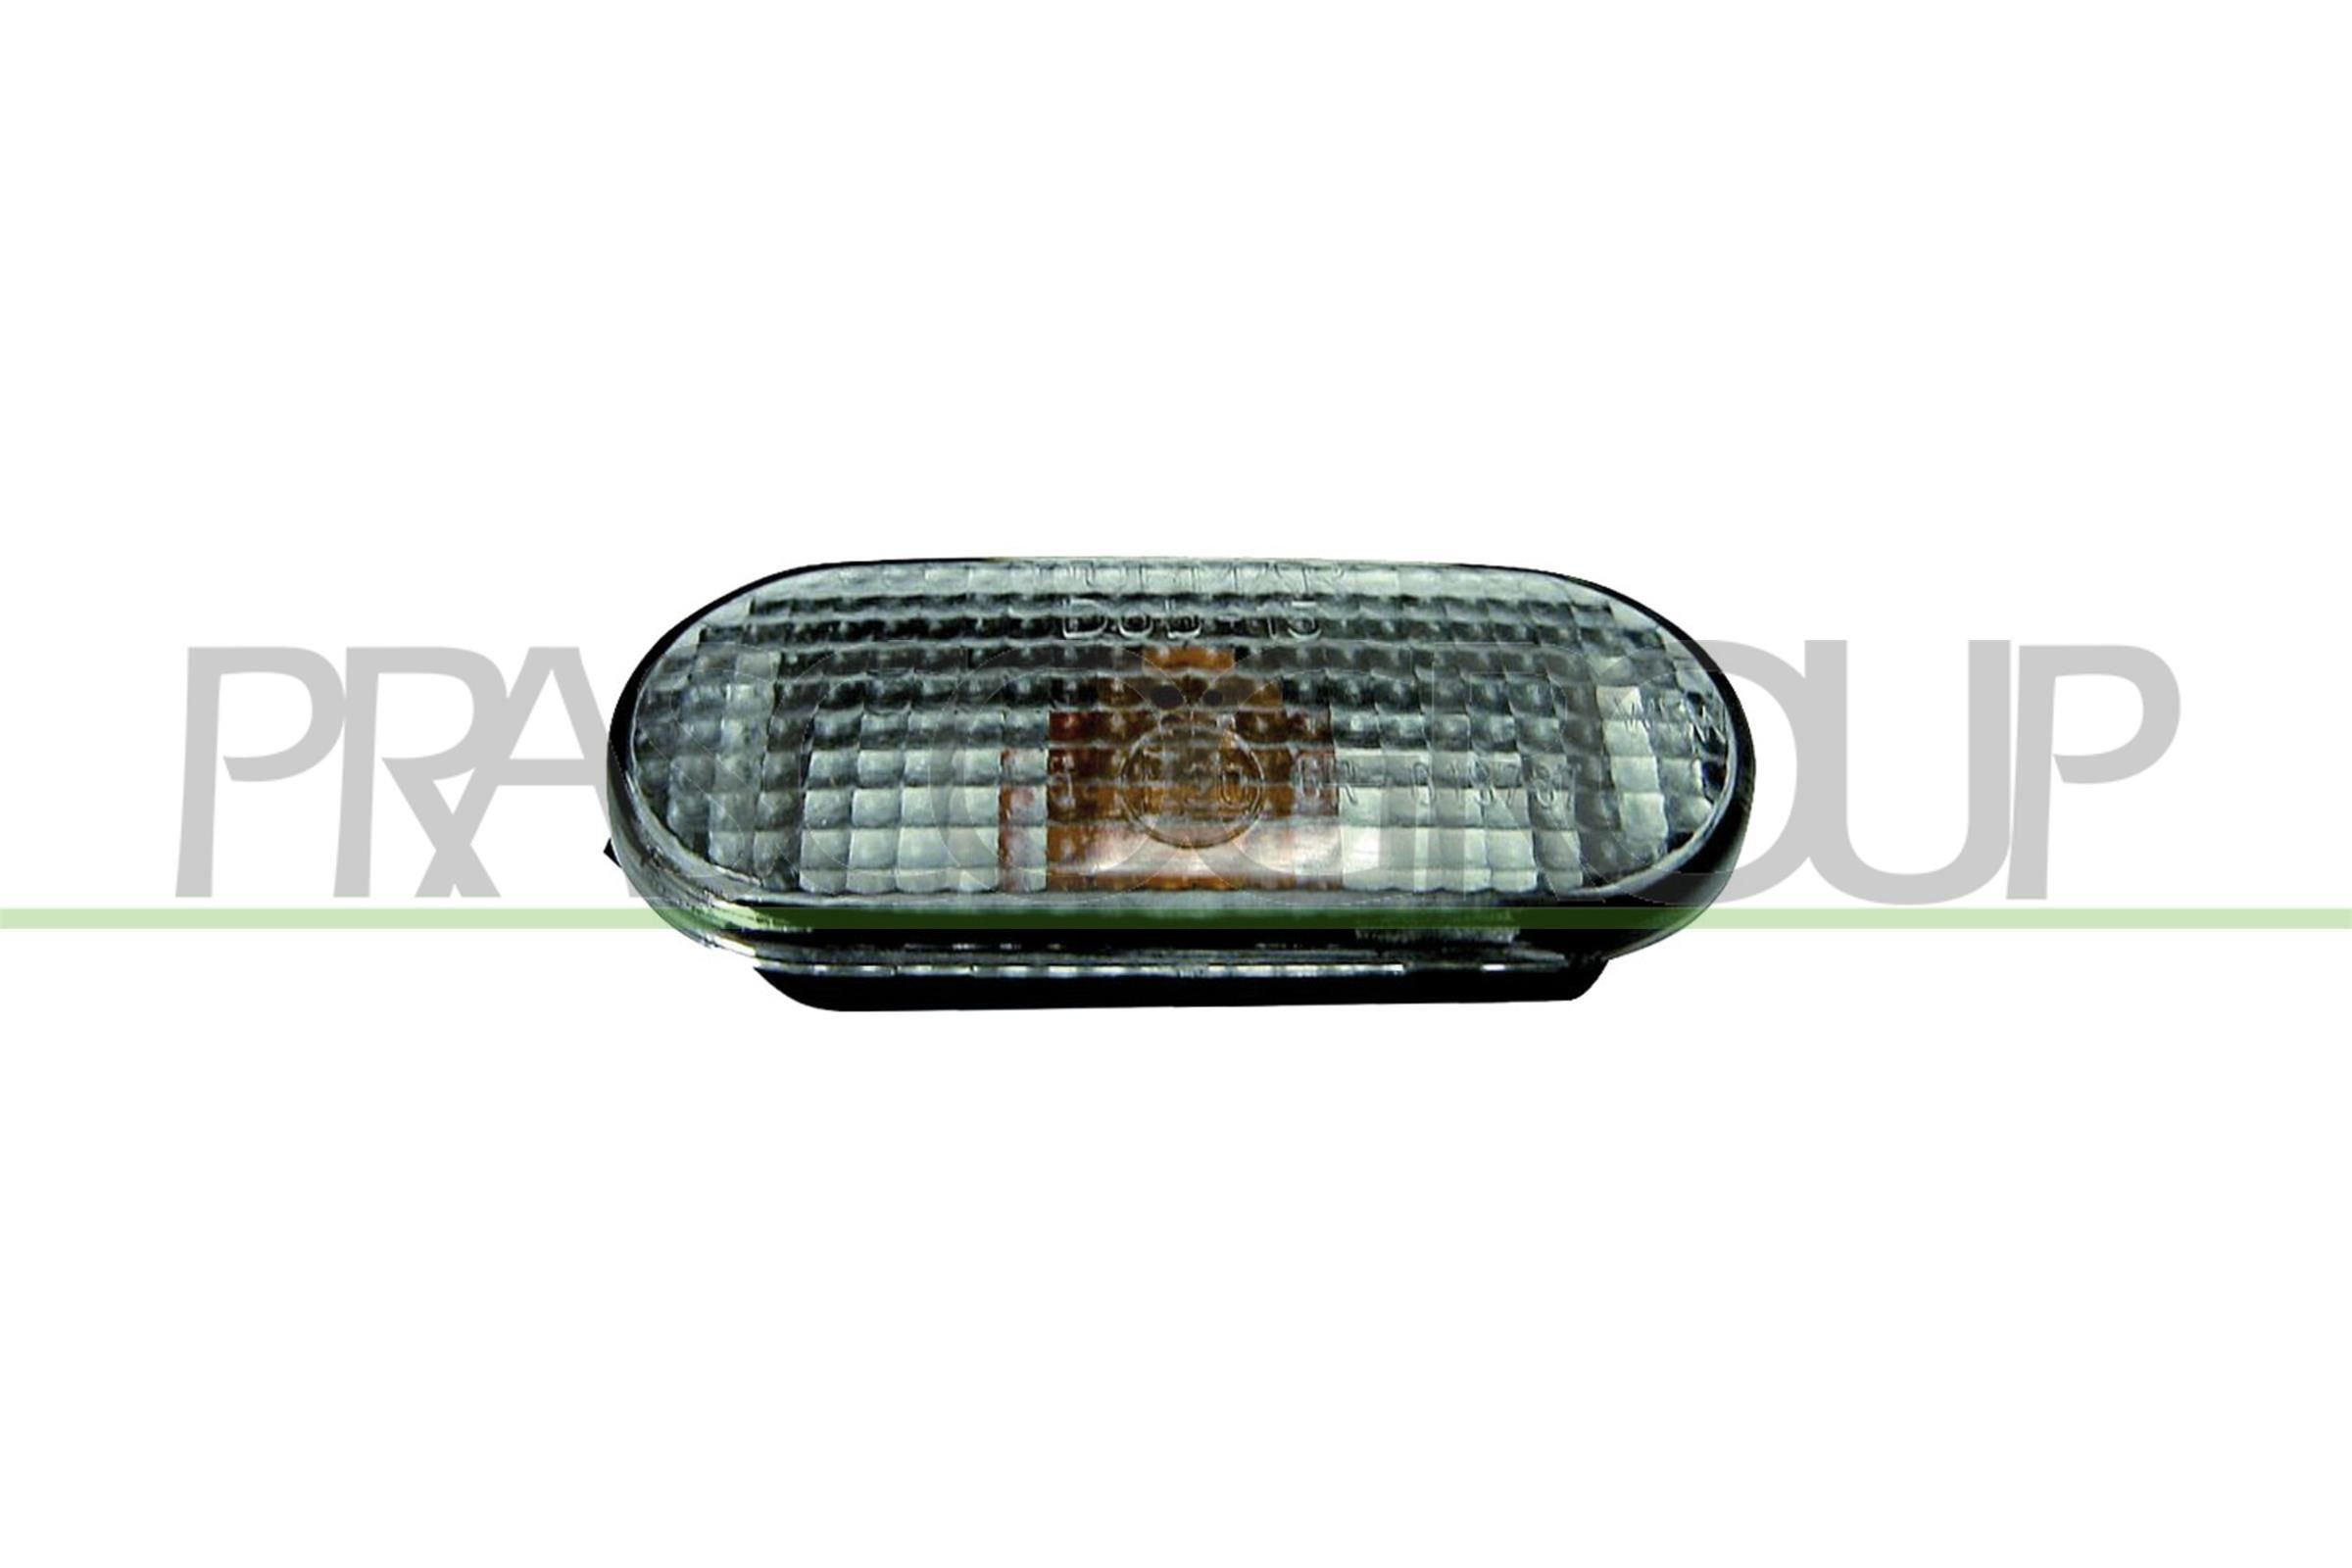 VG0324144 PRASCO Side indicators SEAT white, both sides, lateral installation, without bulb holder, oval